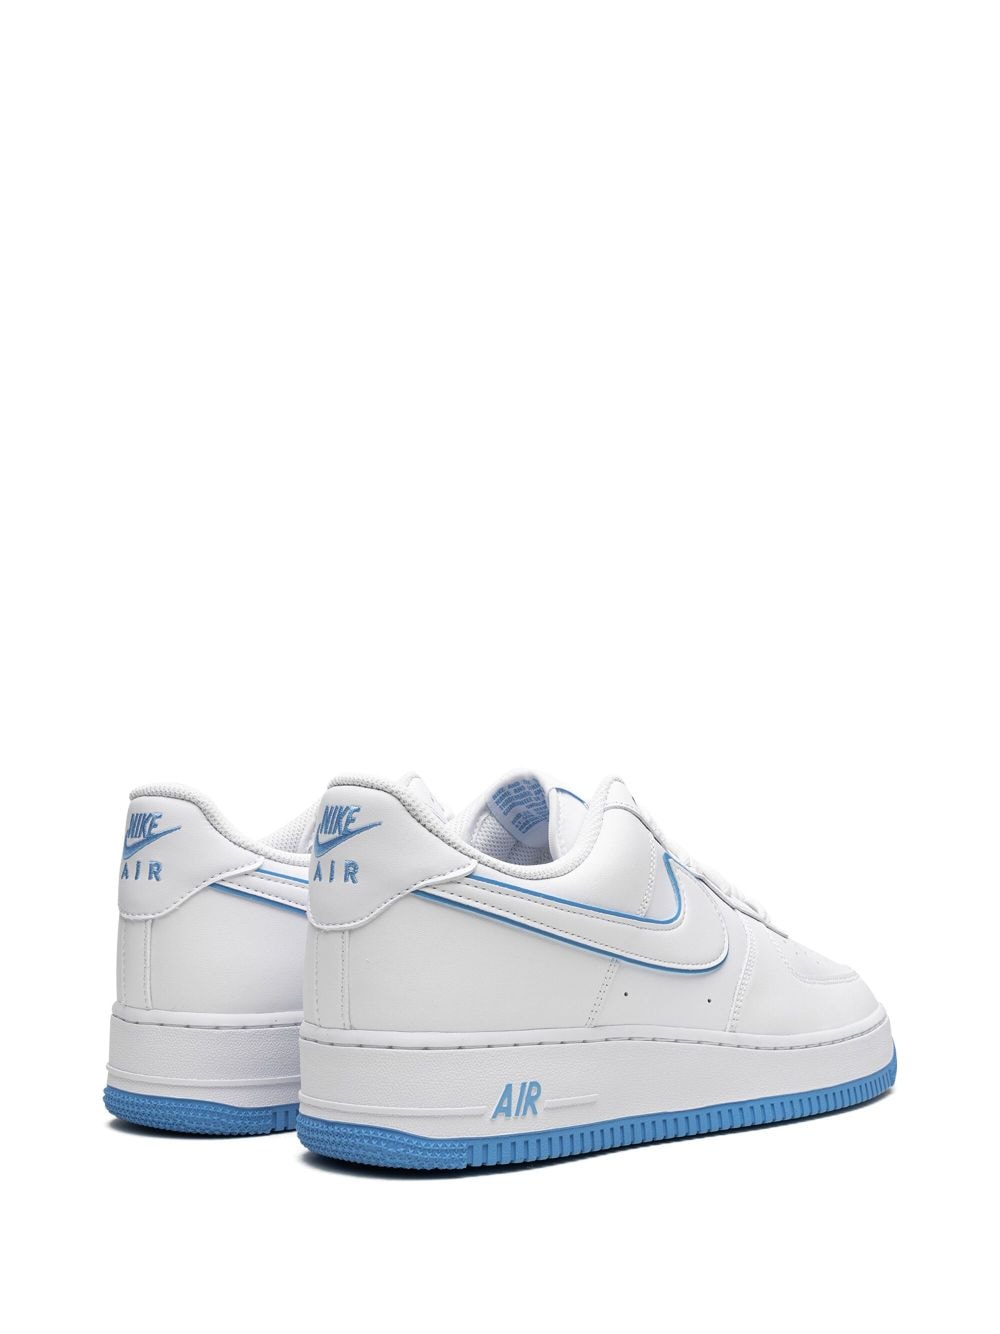 Air Force One WHITE UNC